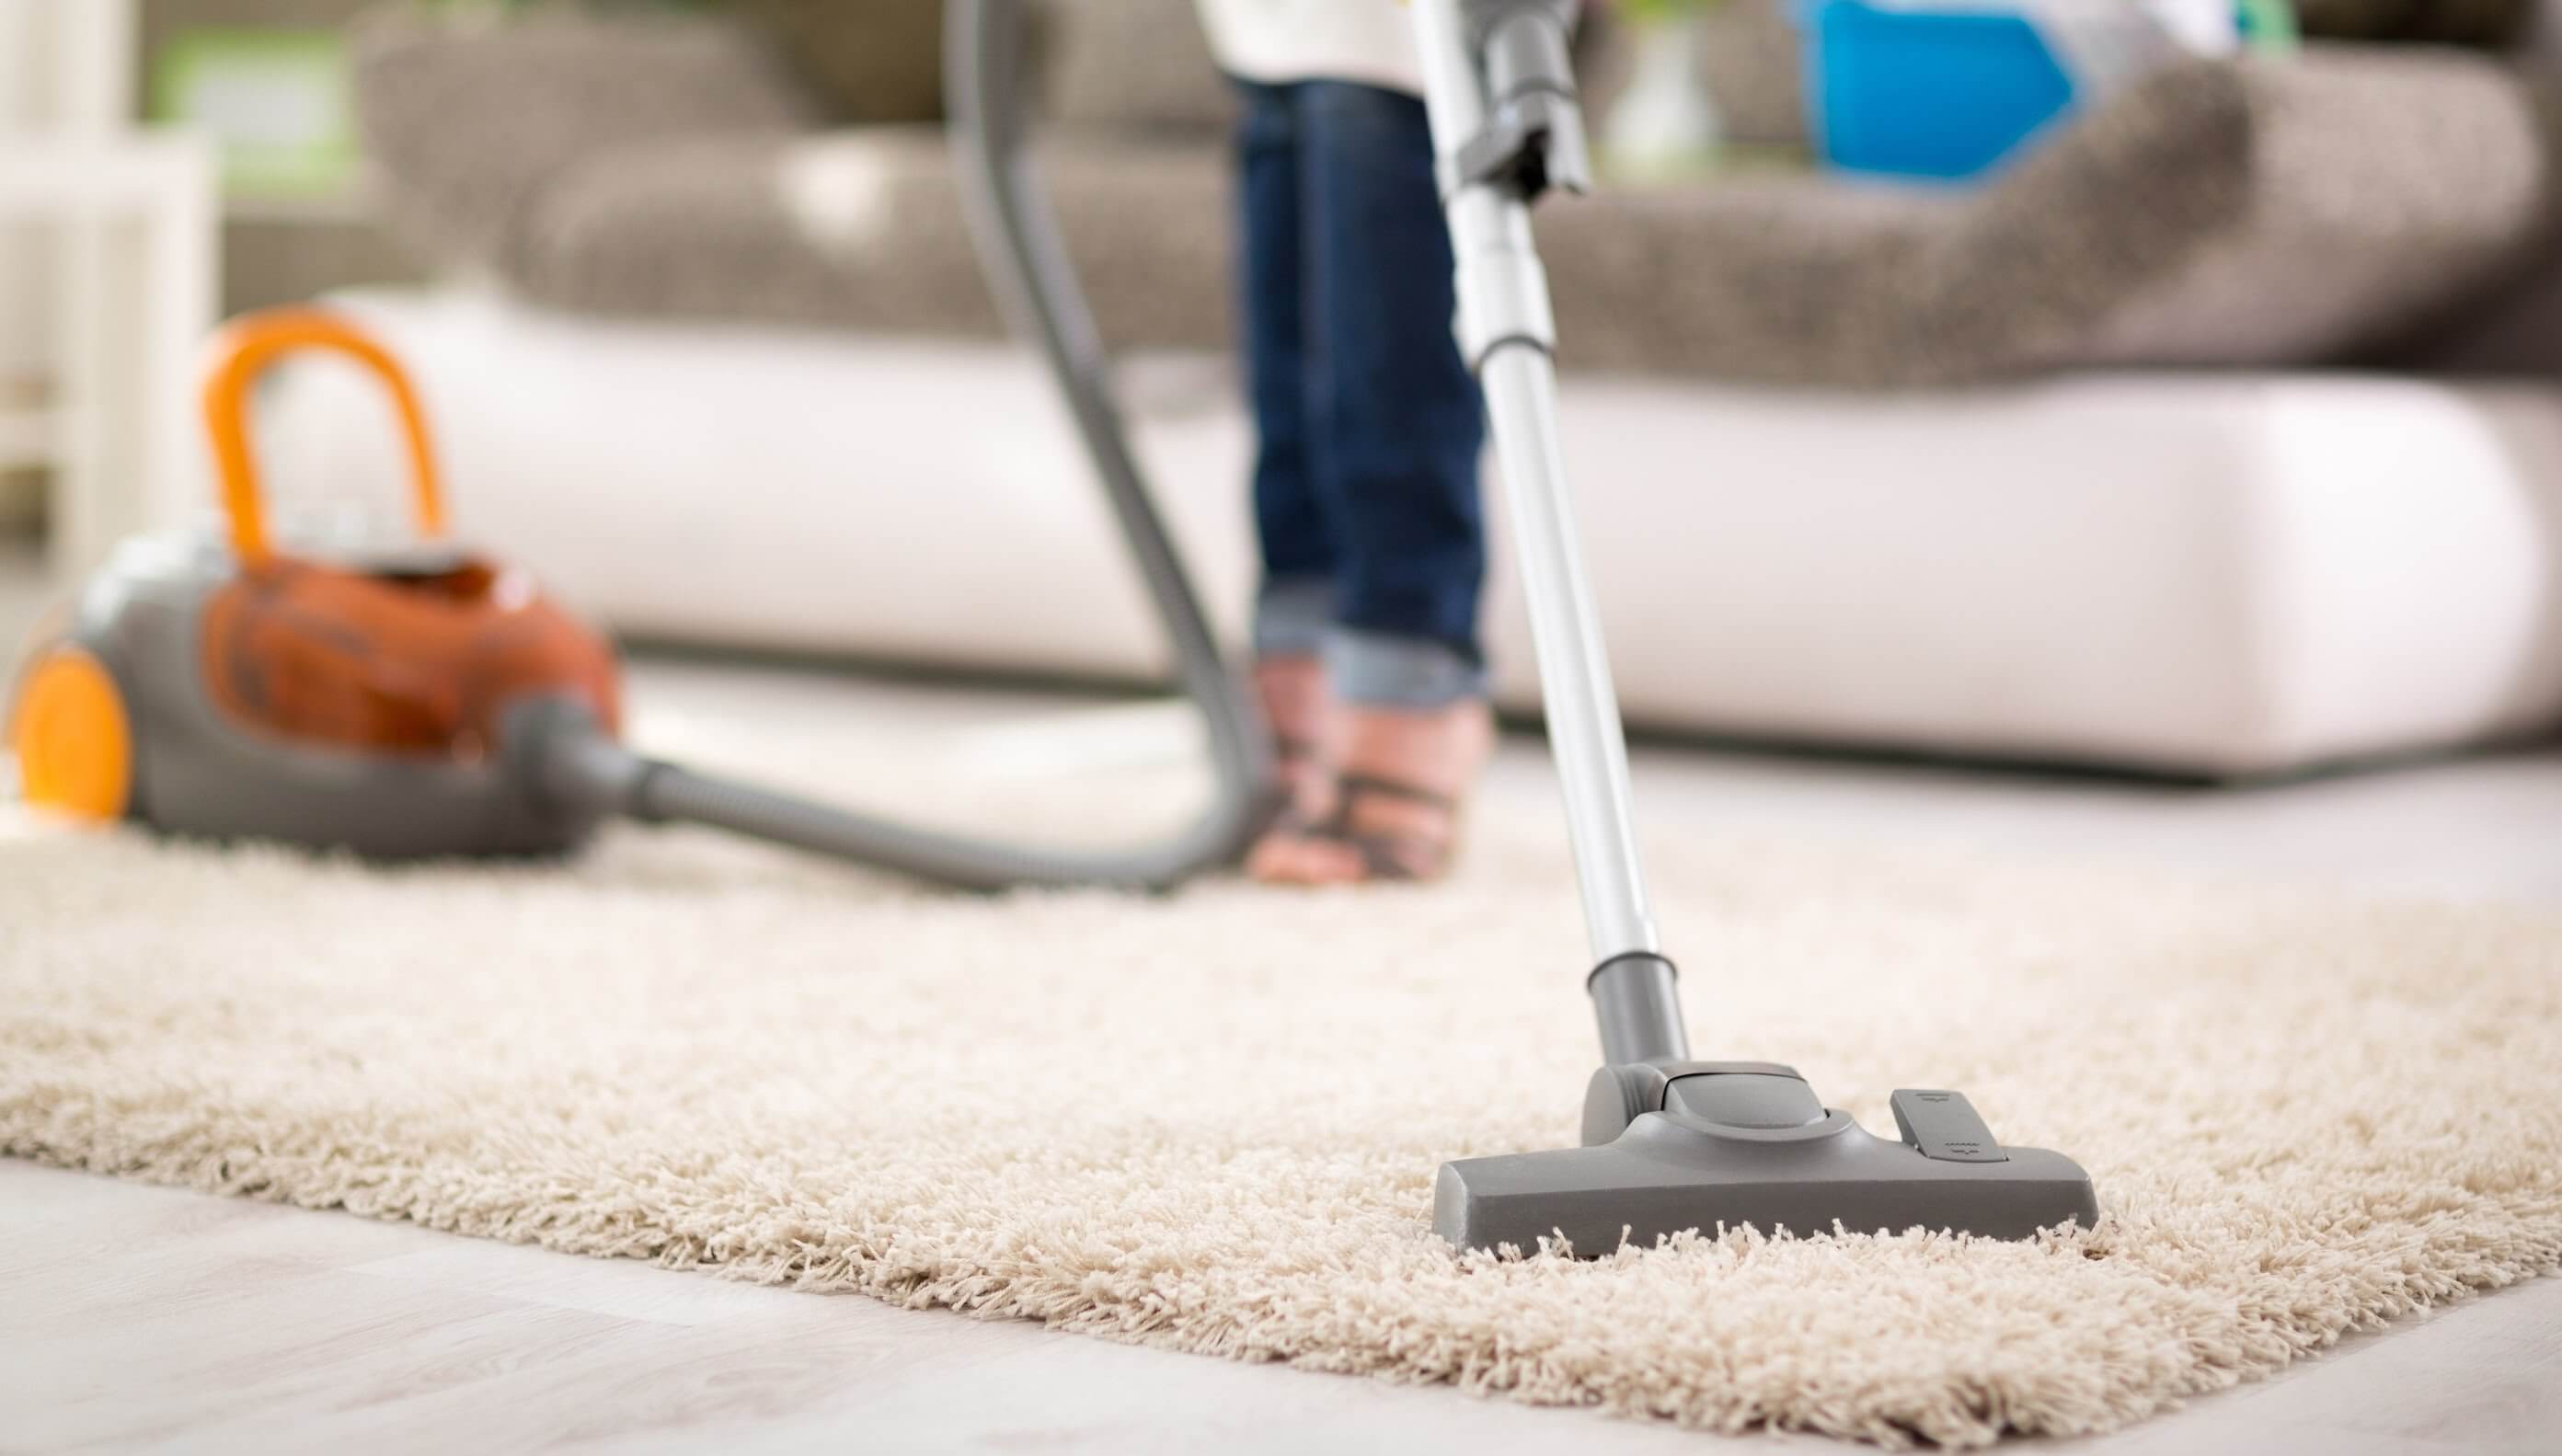 What To Consider Before Cleaning Office Upholsteries And Carpets?